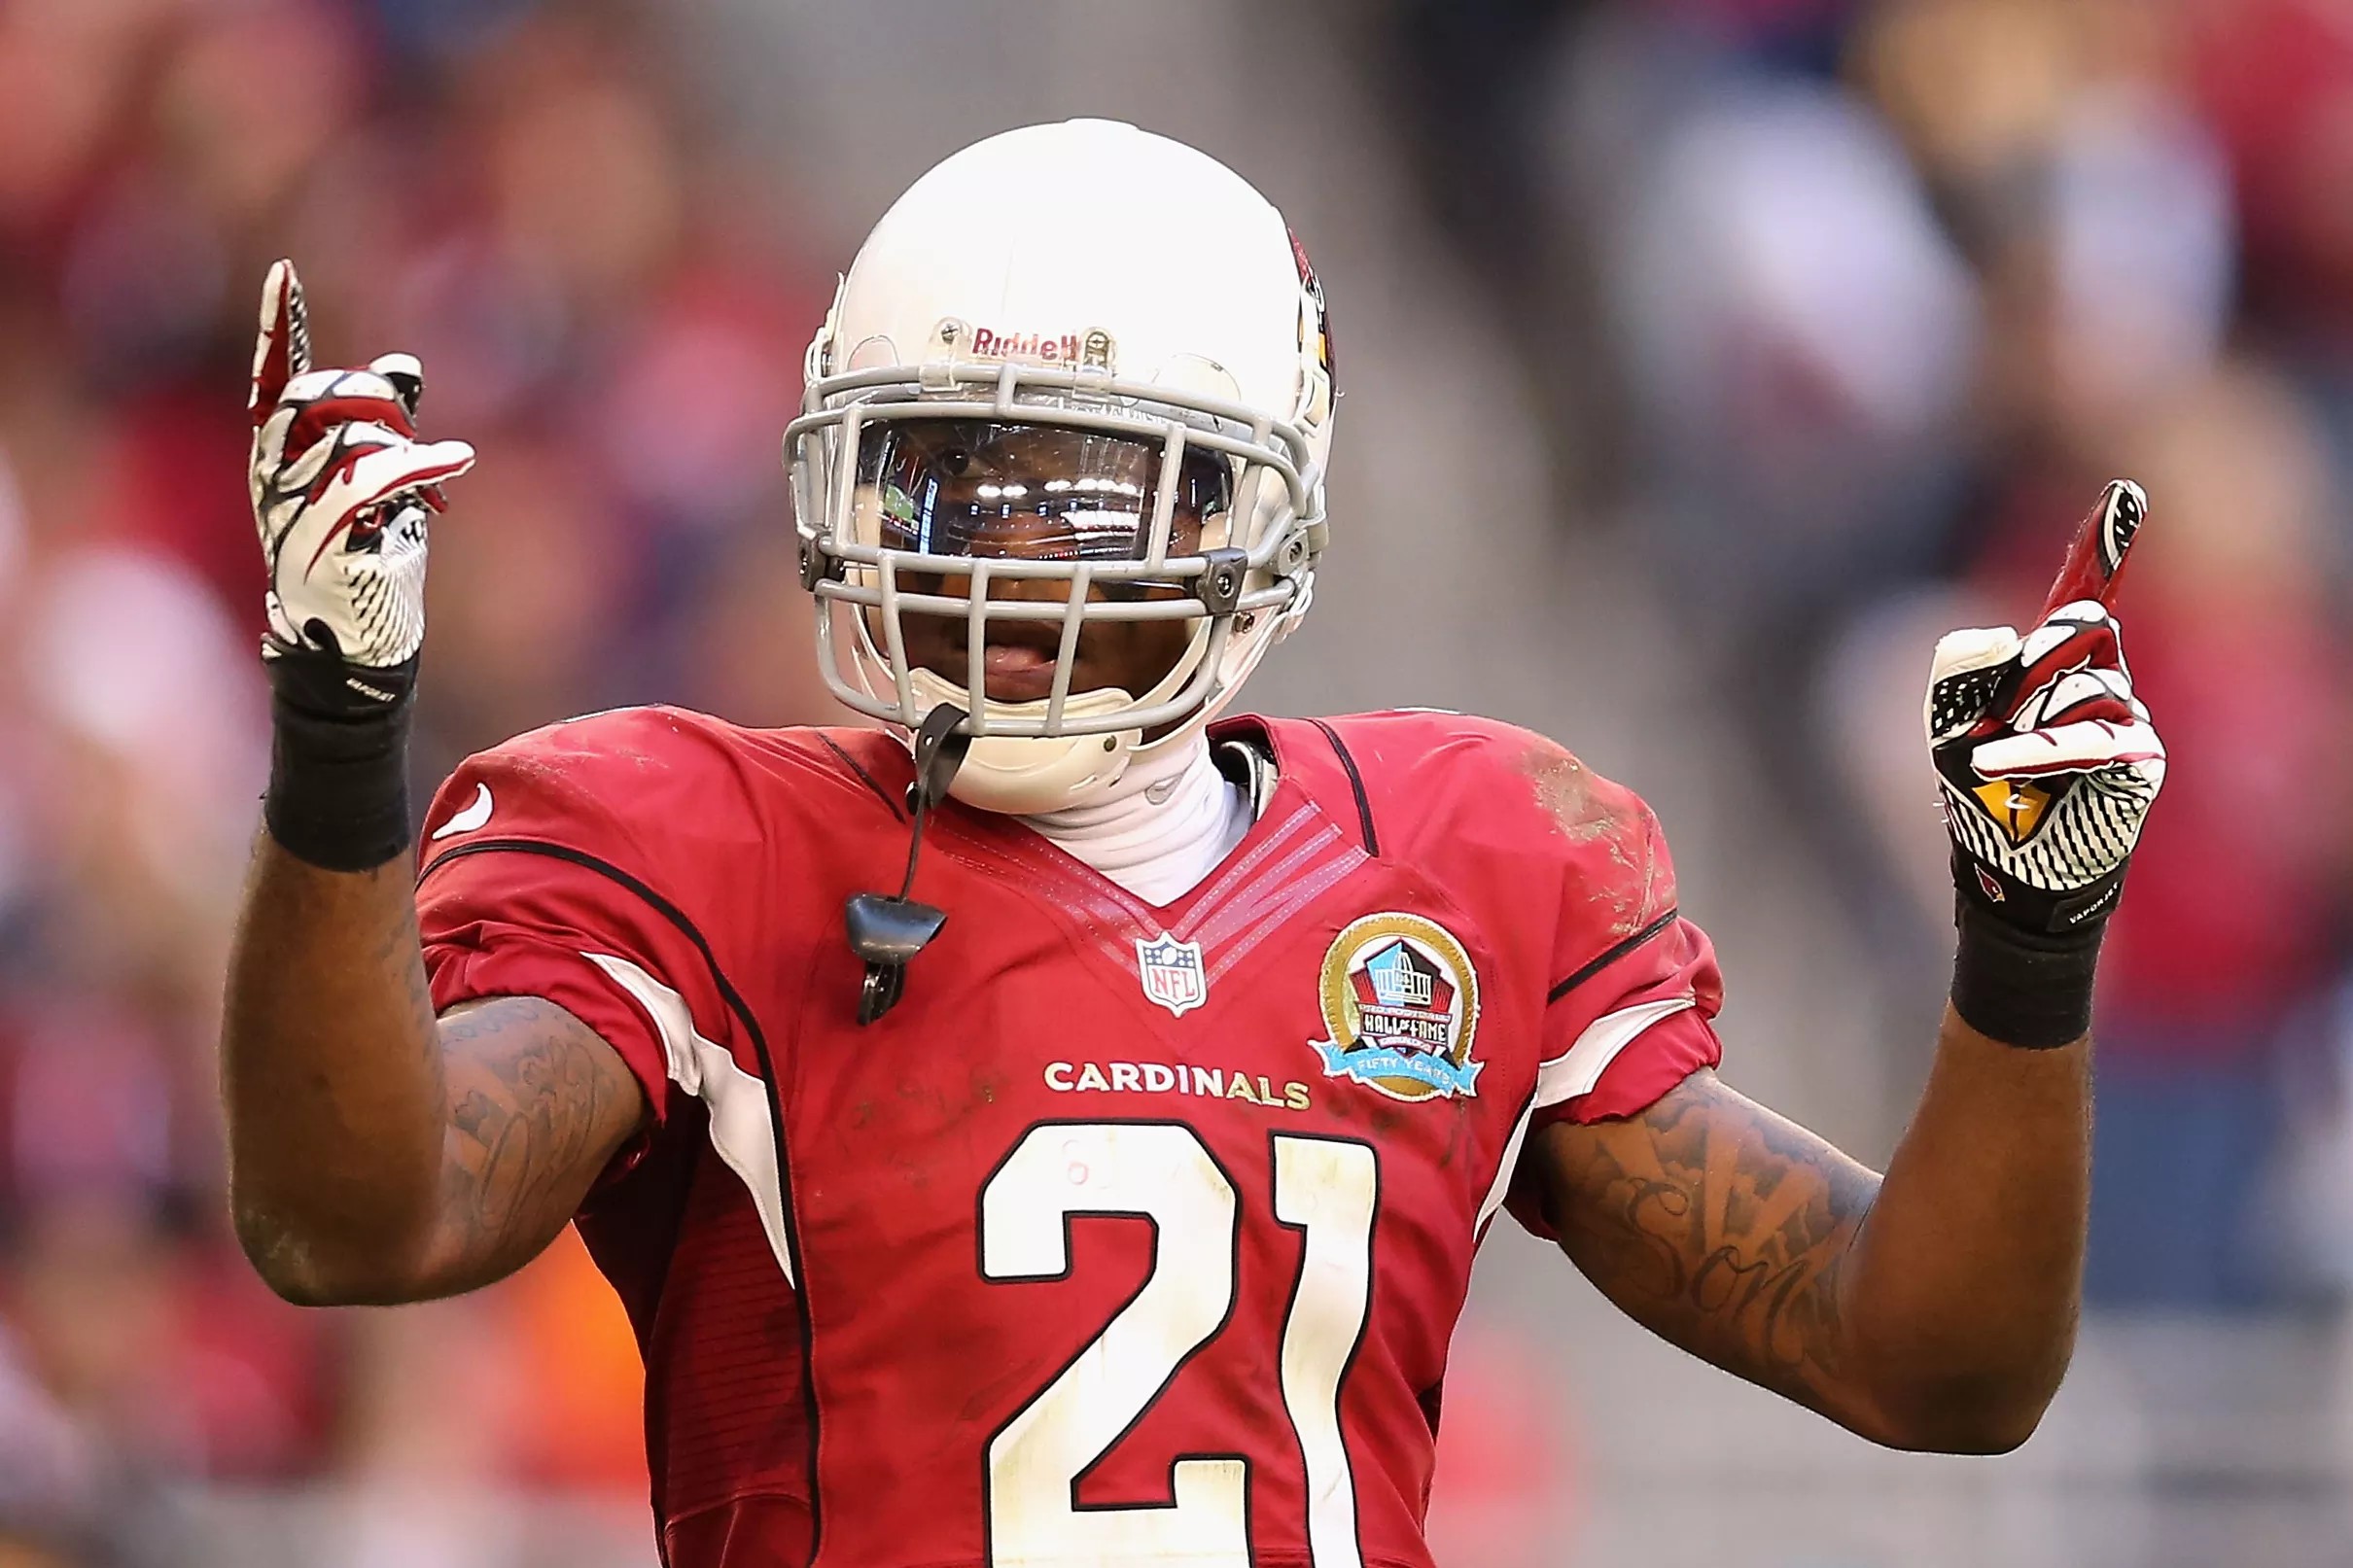 Cardinals CB Patrick Peterson suspended 6 games, will miss opener vs. Lions